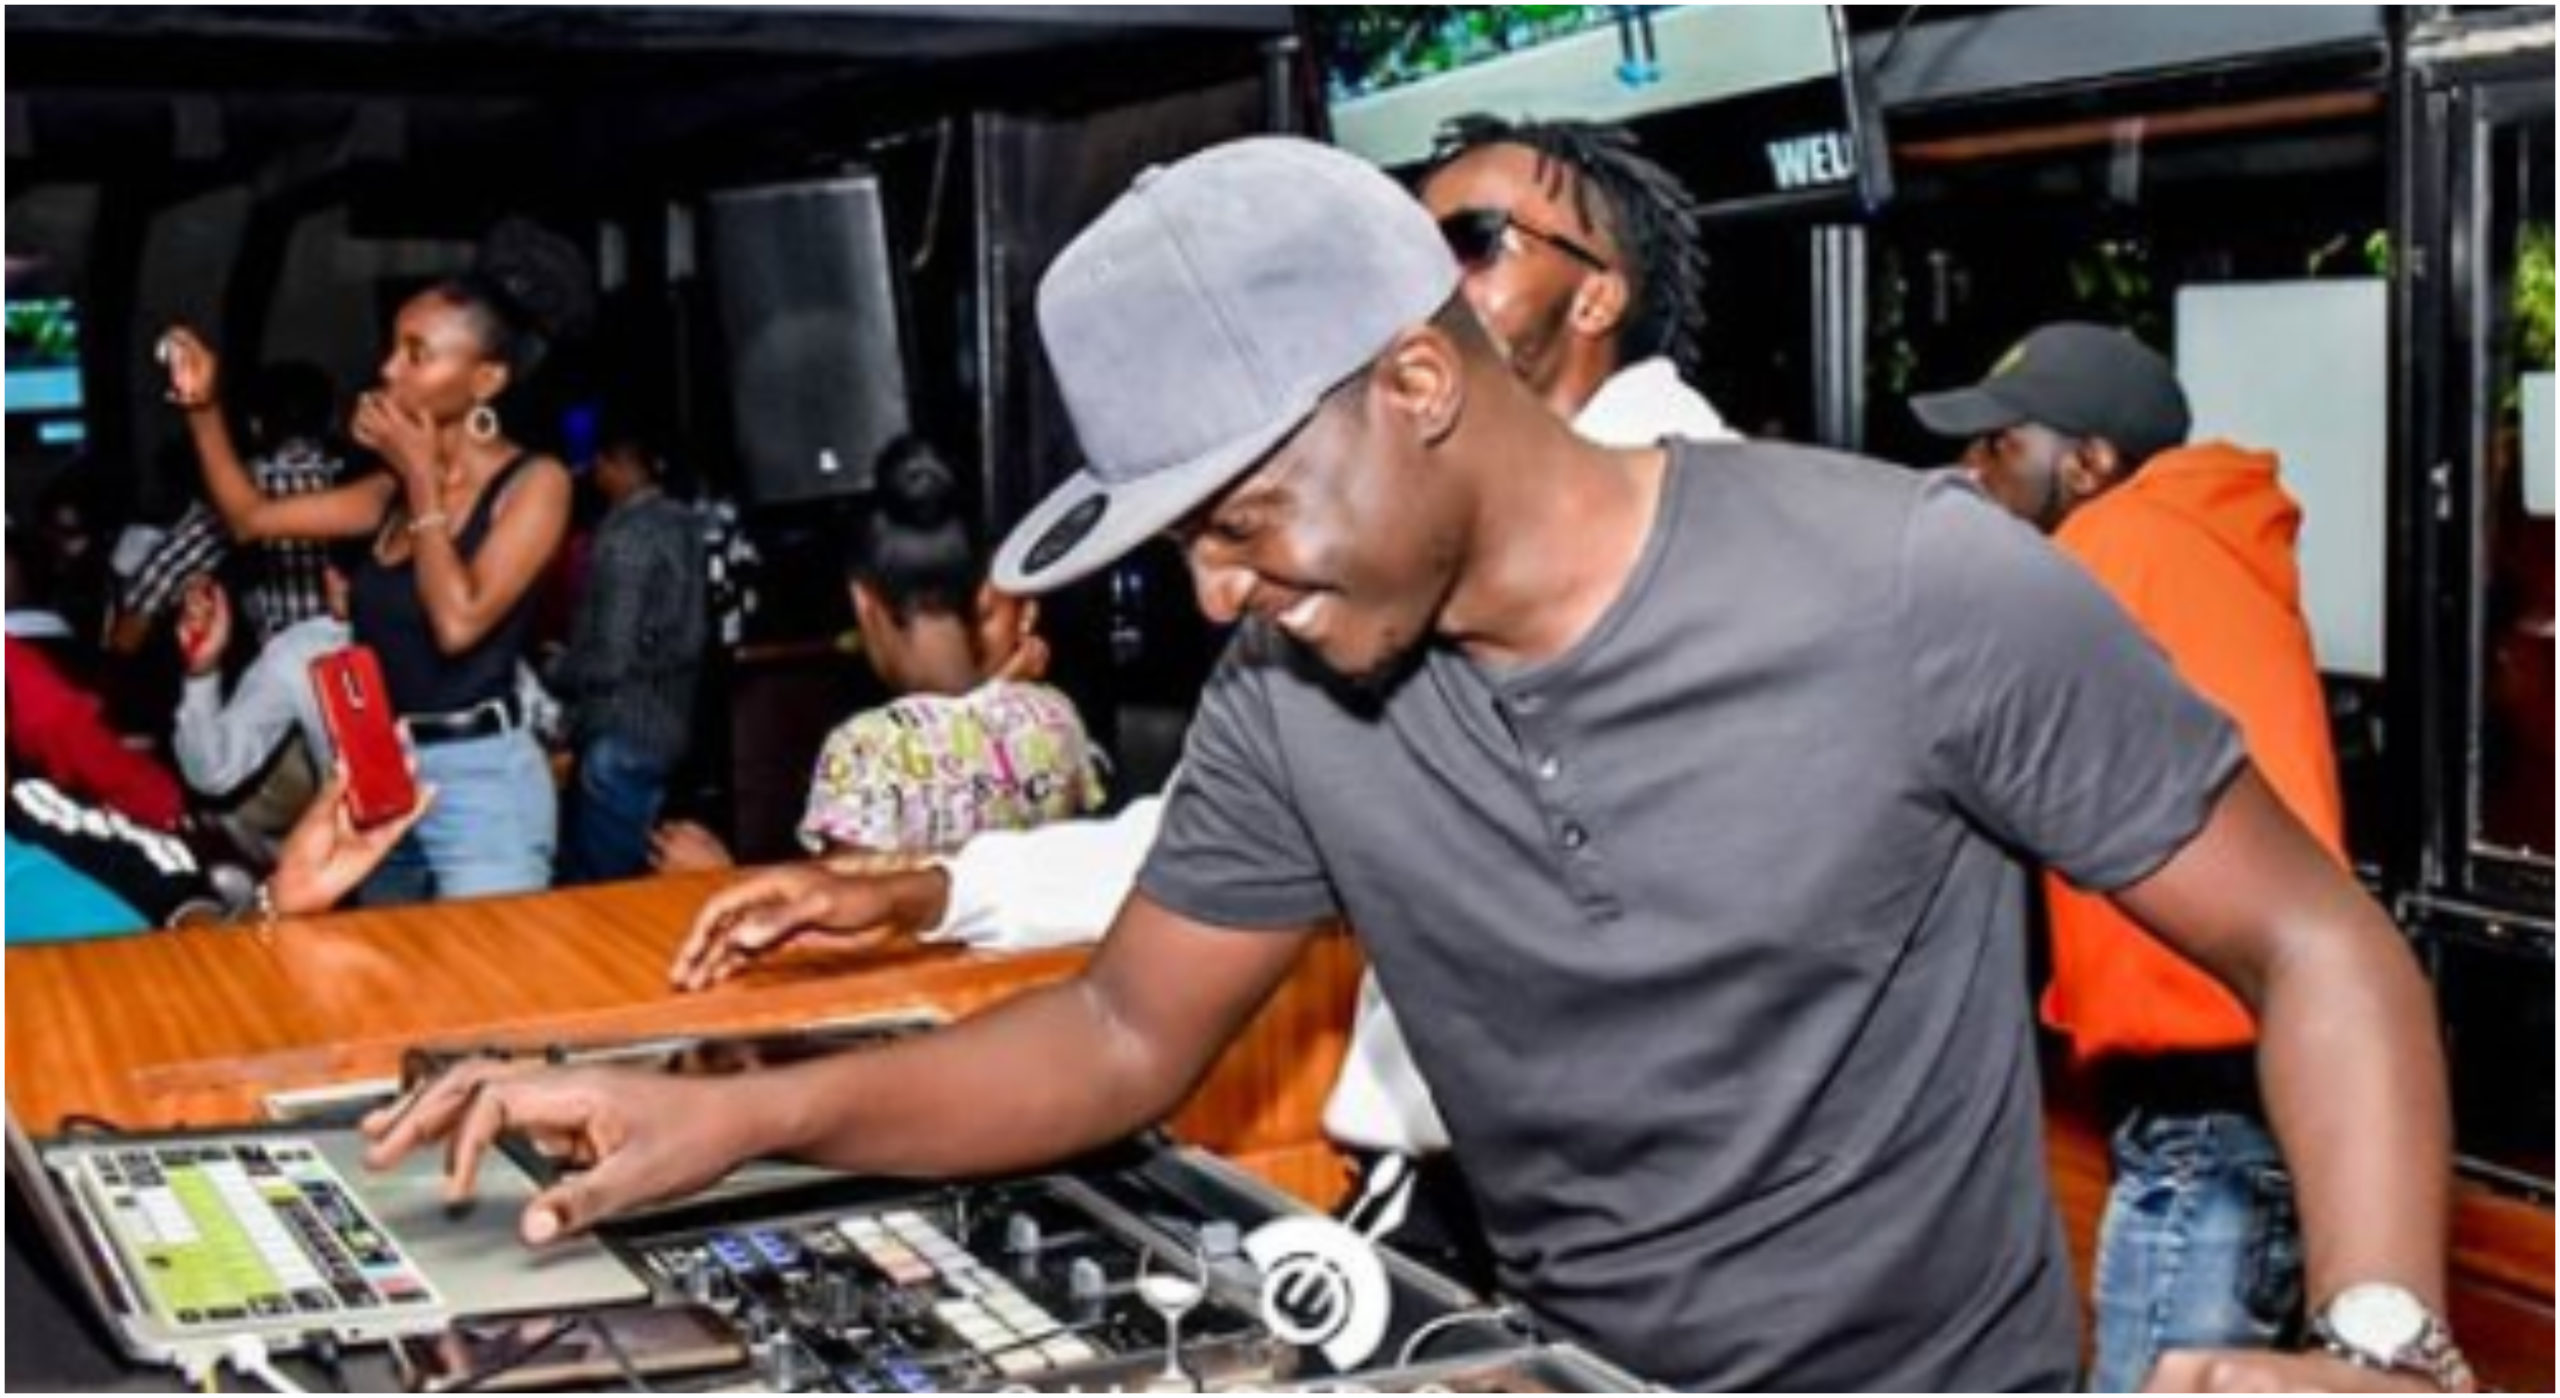 Top Kenyan DJ cries for help after being forcefully evicted from his house over rent arrears (Video)